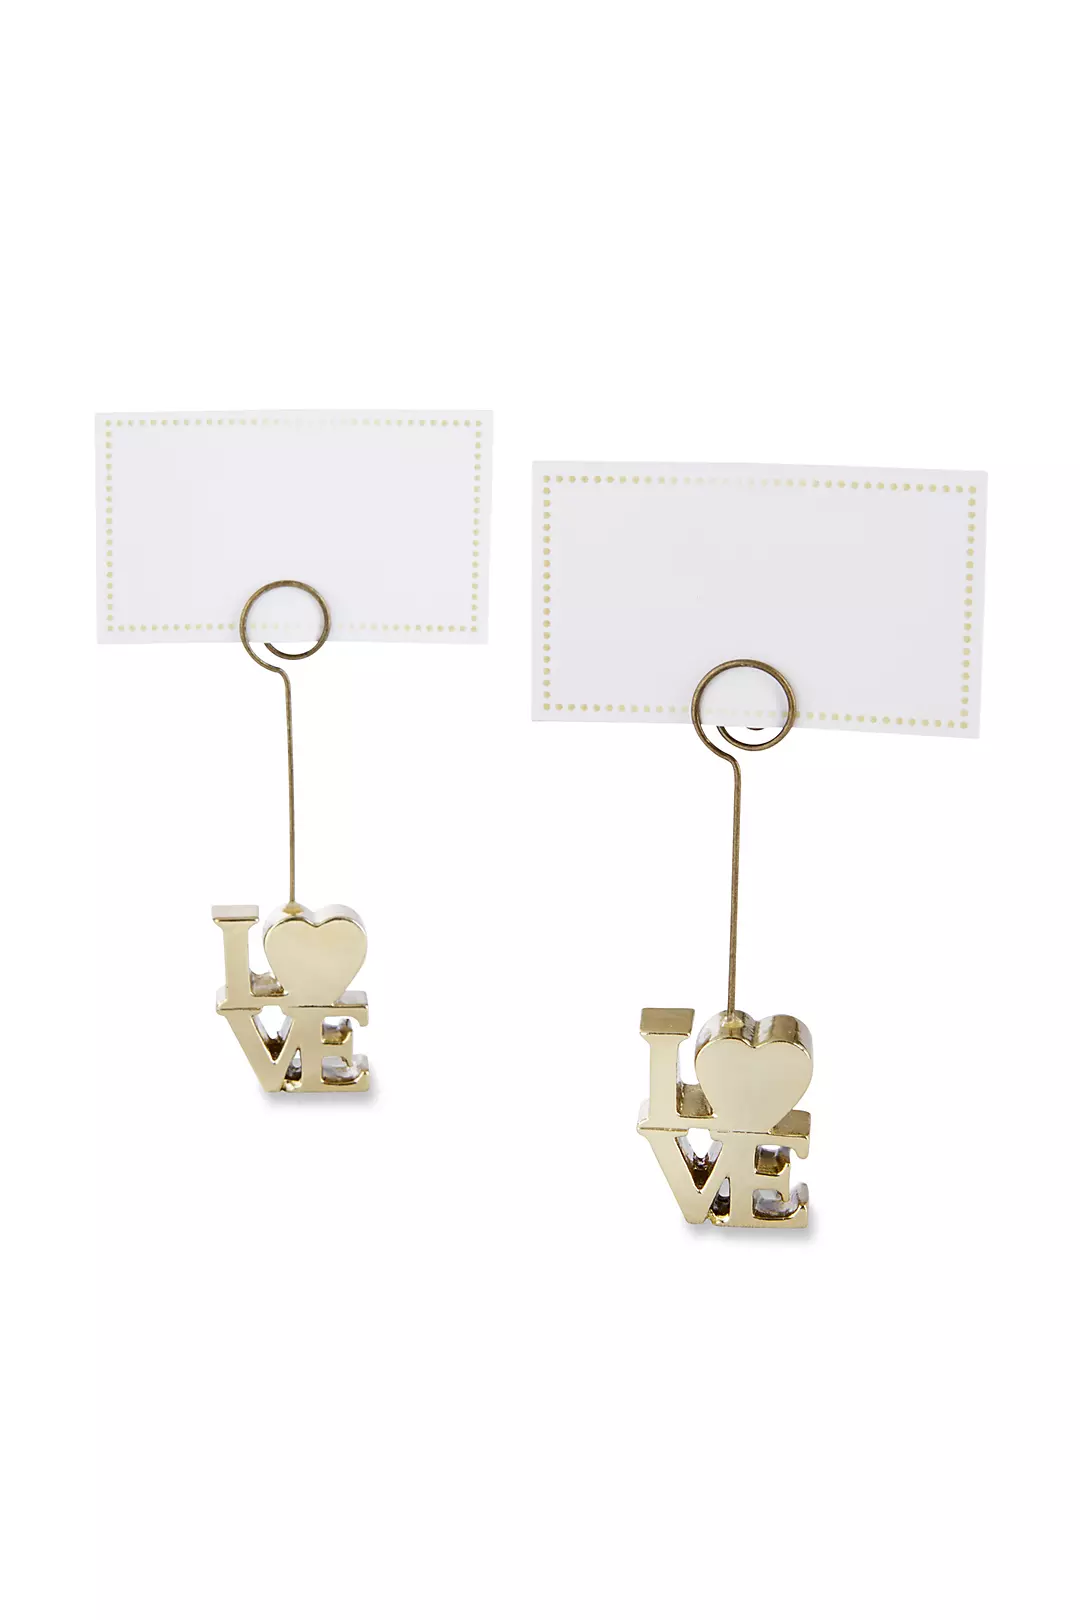 LOVE Gold Place Card Holders Set of 6 Image